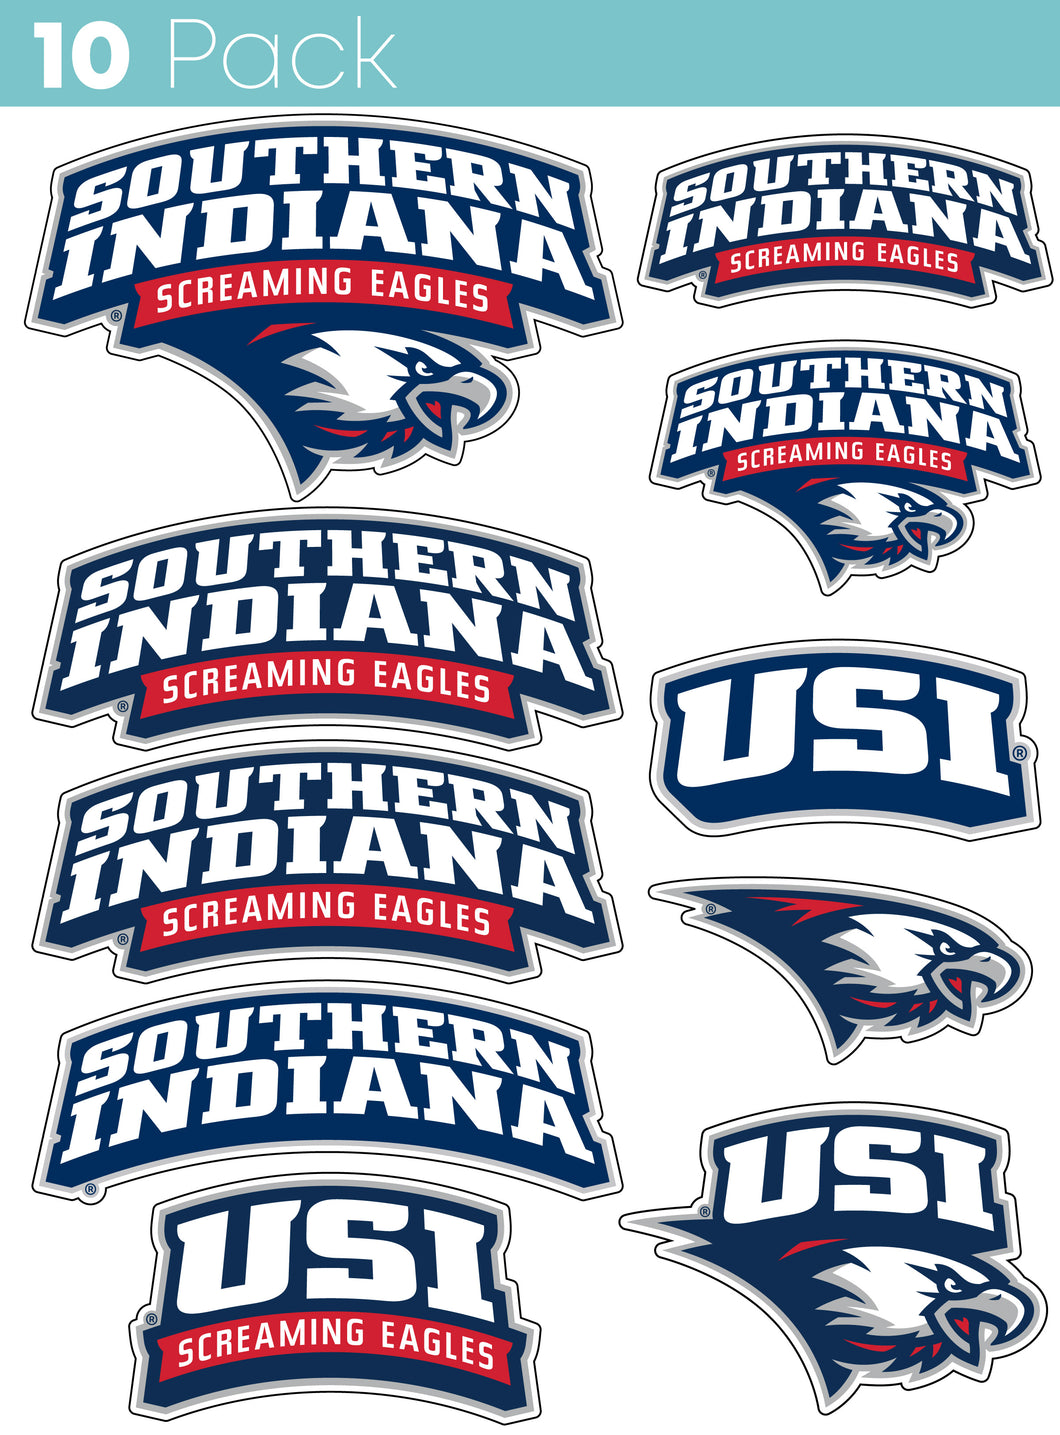 University of Southern Indiana 10-Pack, 4 inches in size on one of its sides NCAA Durable School Spirit Vinyl Decal Sticker